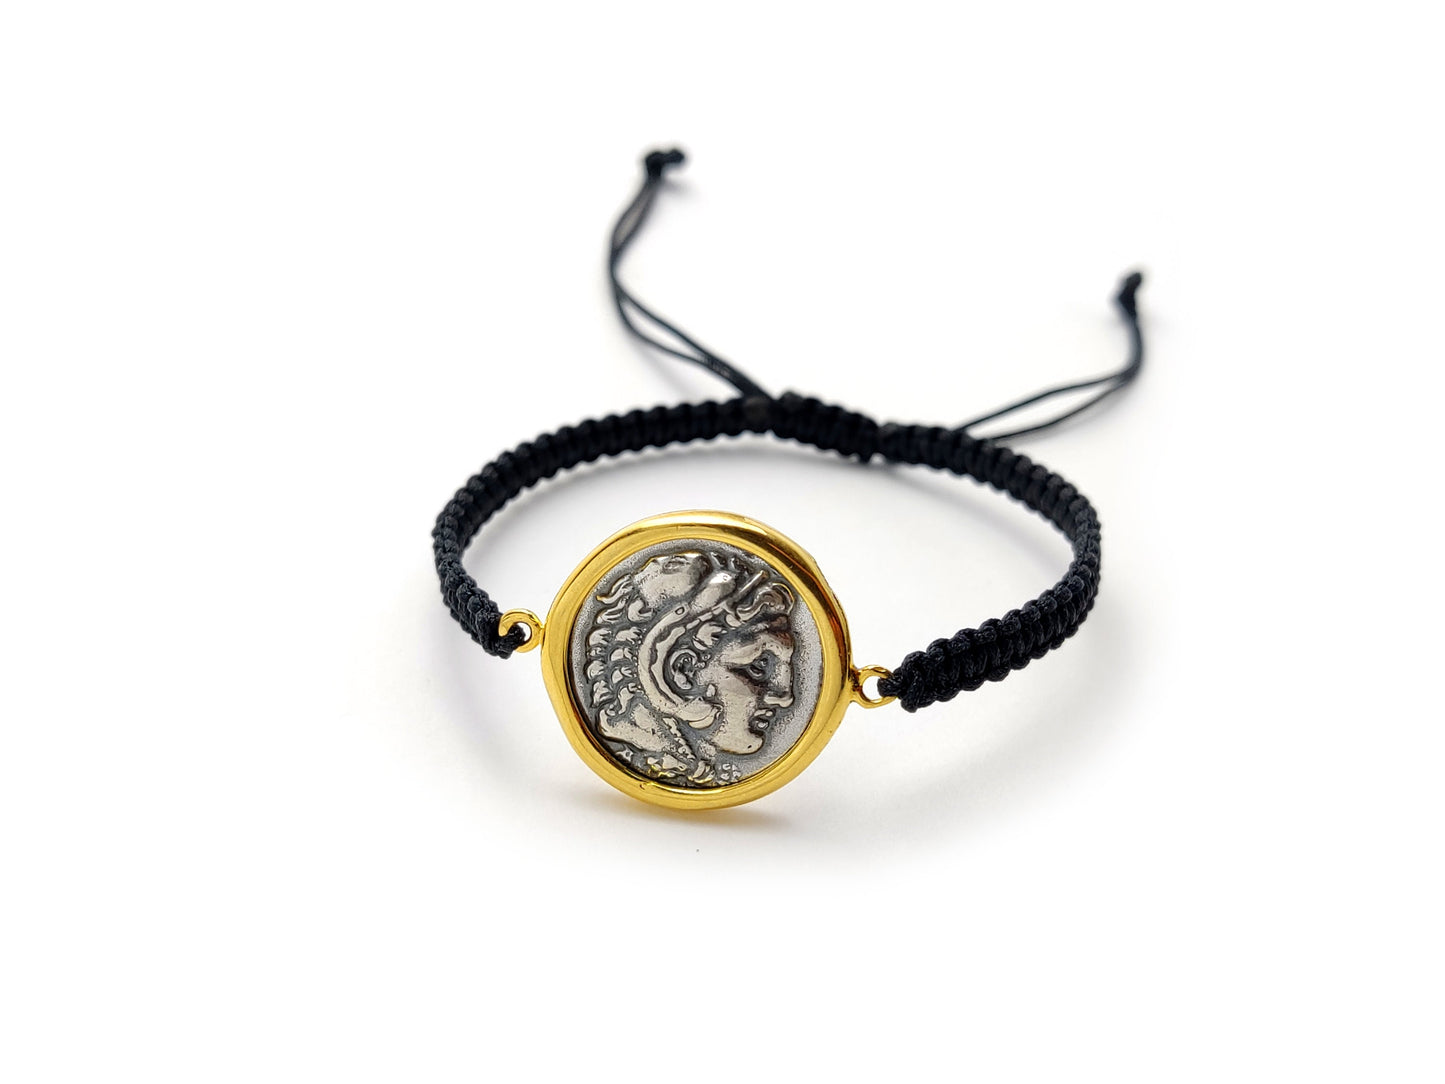 Image of a Sterling Silver 925 Alexander The Great Bracelet featuring a Gold Plated 22K Coin Frame, sized at 21mm (0.81 inches), with a Hallmark 925 stamp, handmade in Greece, and paired with a sleek black cord.